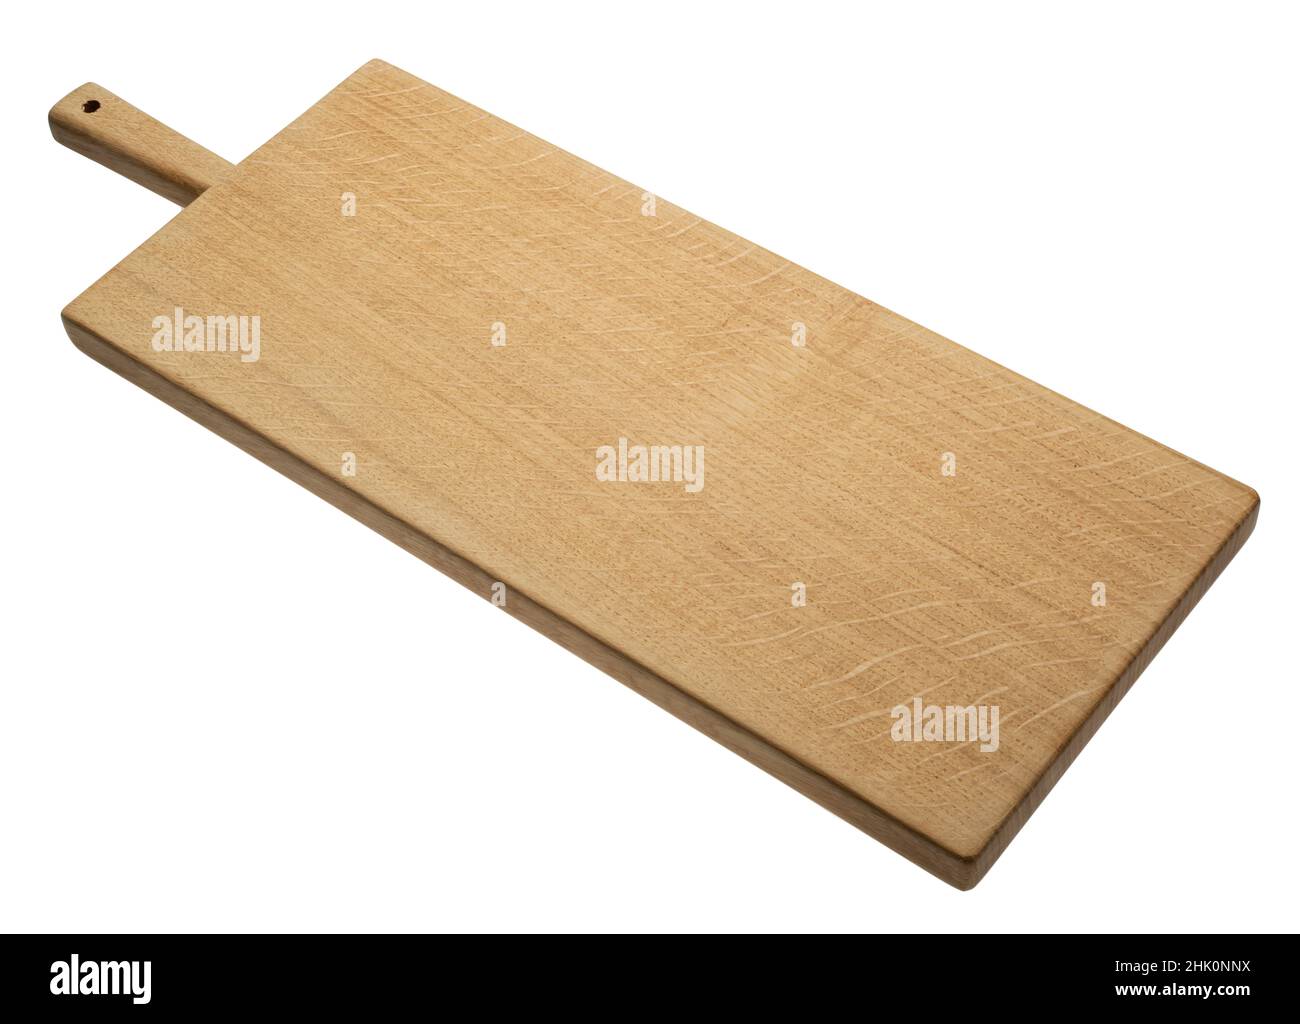 Chopping board or cutting board. A cut out against a white background. Food preparation cutting surface used in the kitchen. Stock Photo